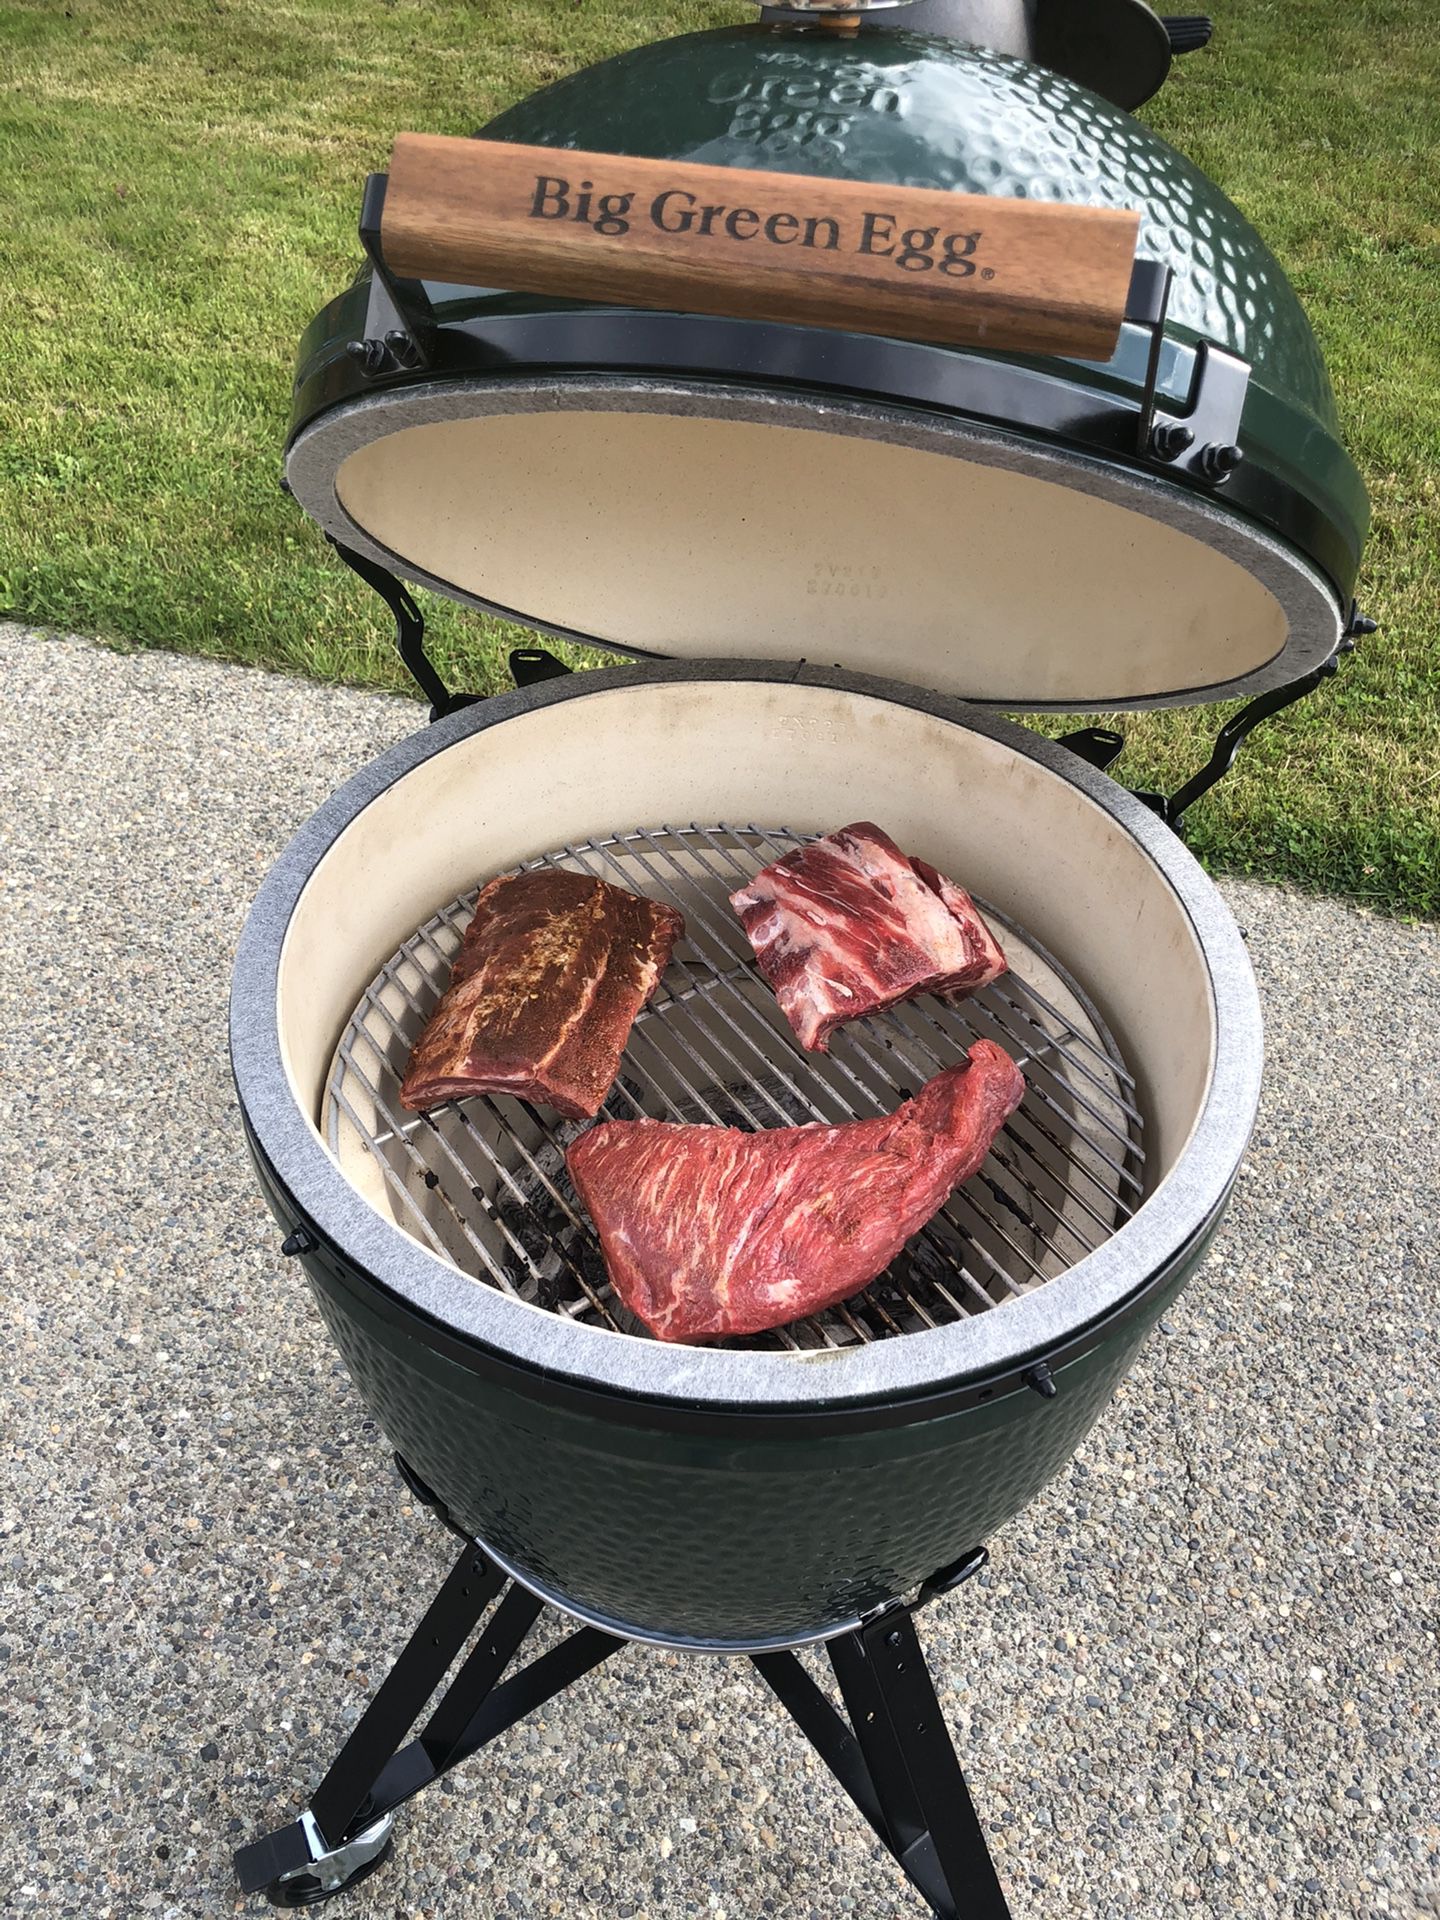 Big green egg - large size - used 1 TIME !